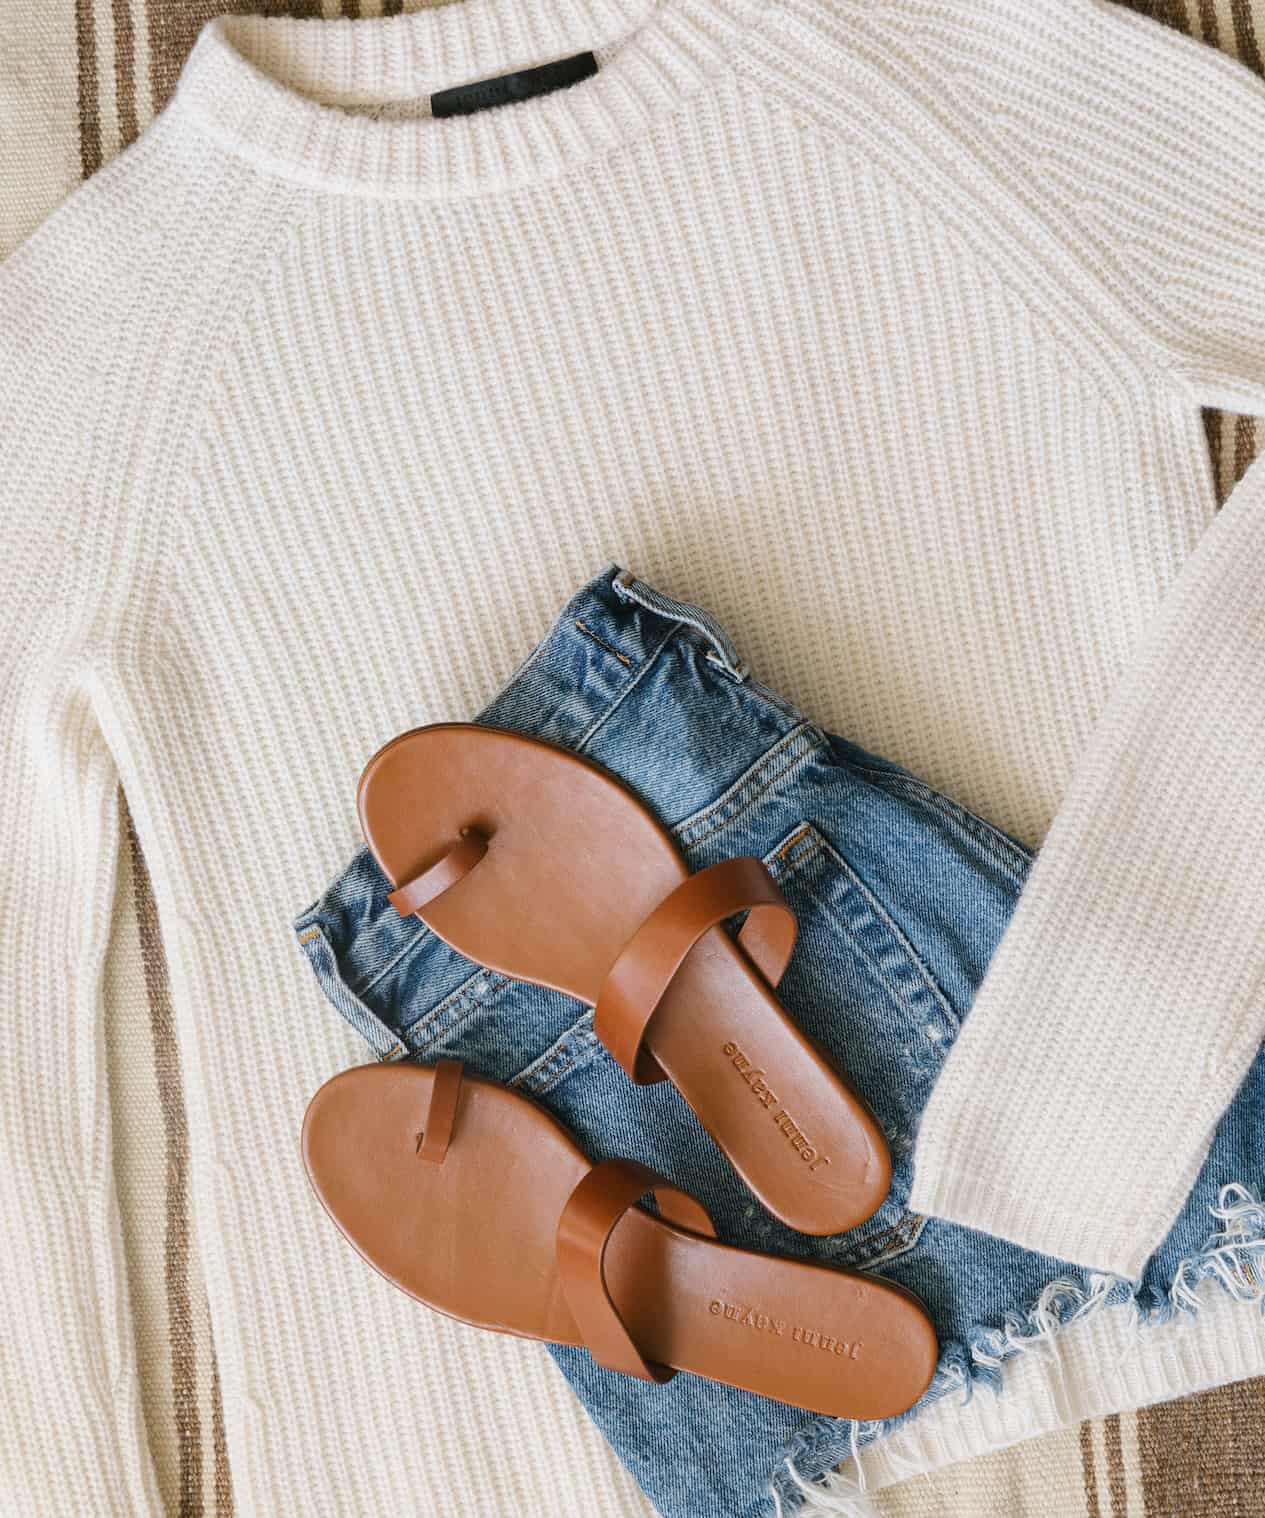 image of an outfit flatly with a knit cashmere fisherman sweater, blue denim shorts, and brown sandals